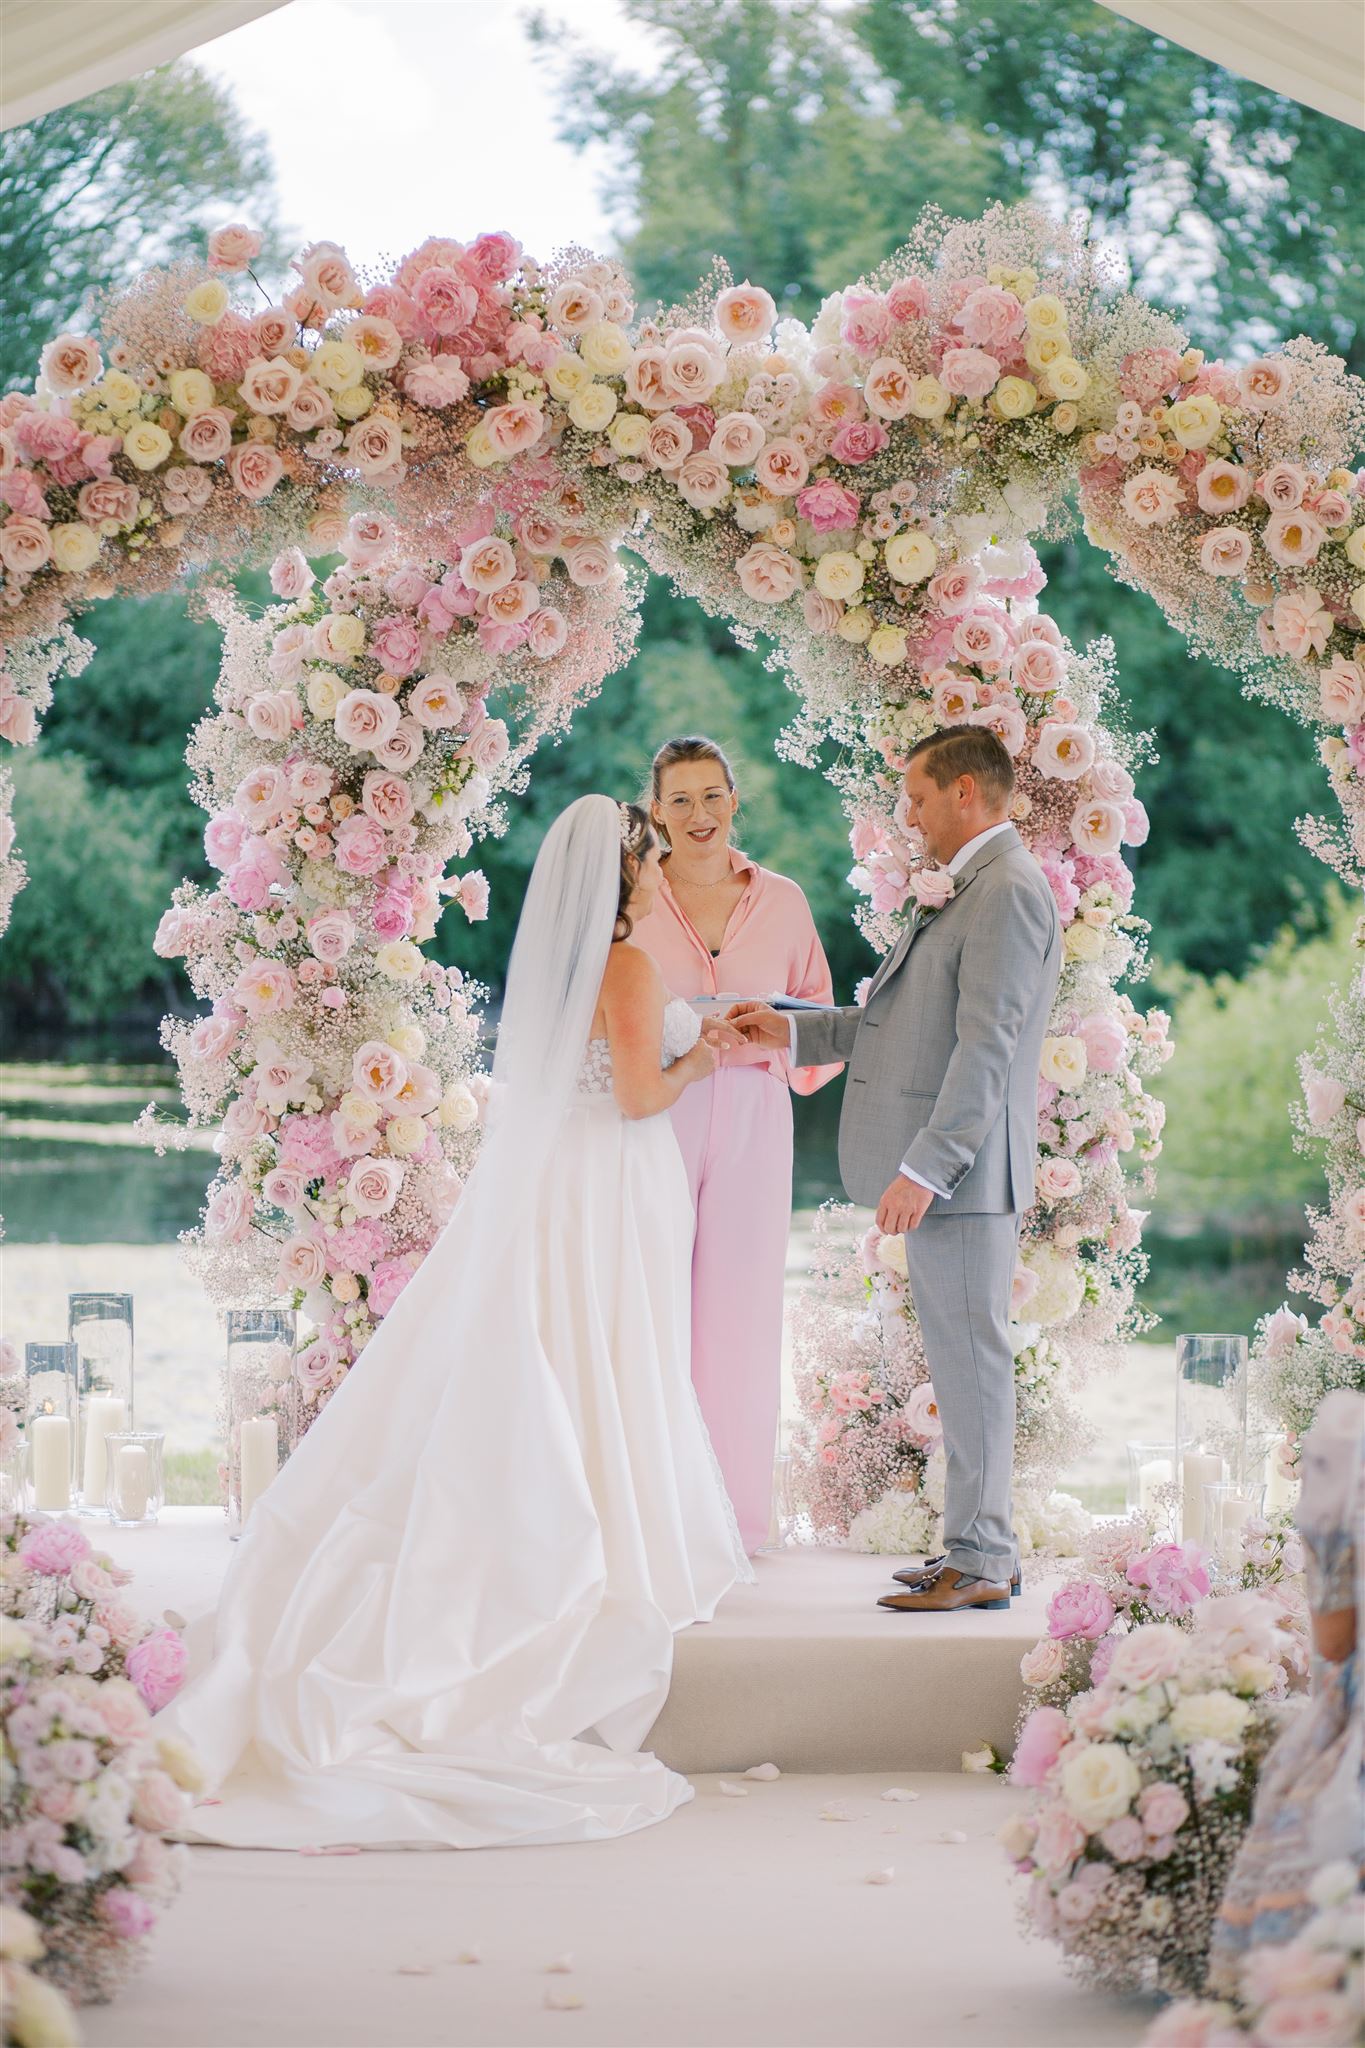 Celebrant Olivia Coleman stands alongside a bride and groom exchanging heartfelt vows by a beautiful arch of flowers at a wedding in Essex. The couple holds hands, surrounded by the enchanting atmosphere of love and commitment on their special day.